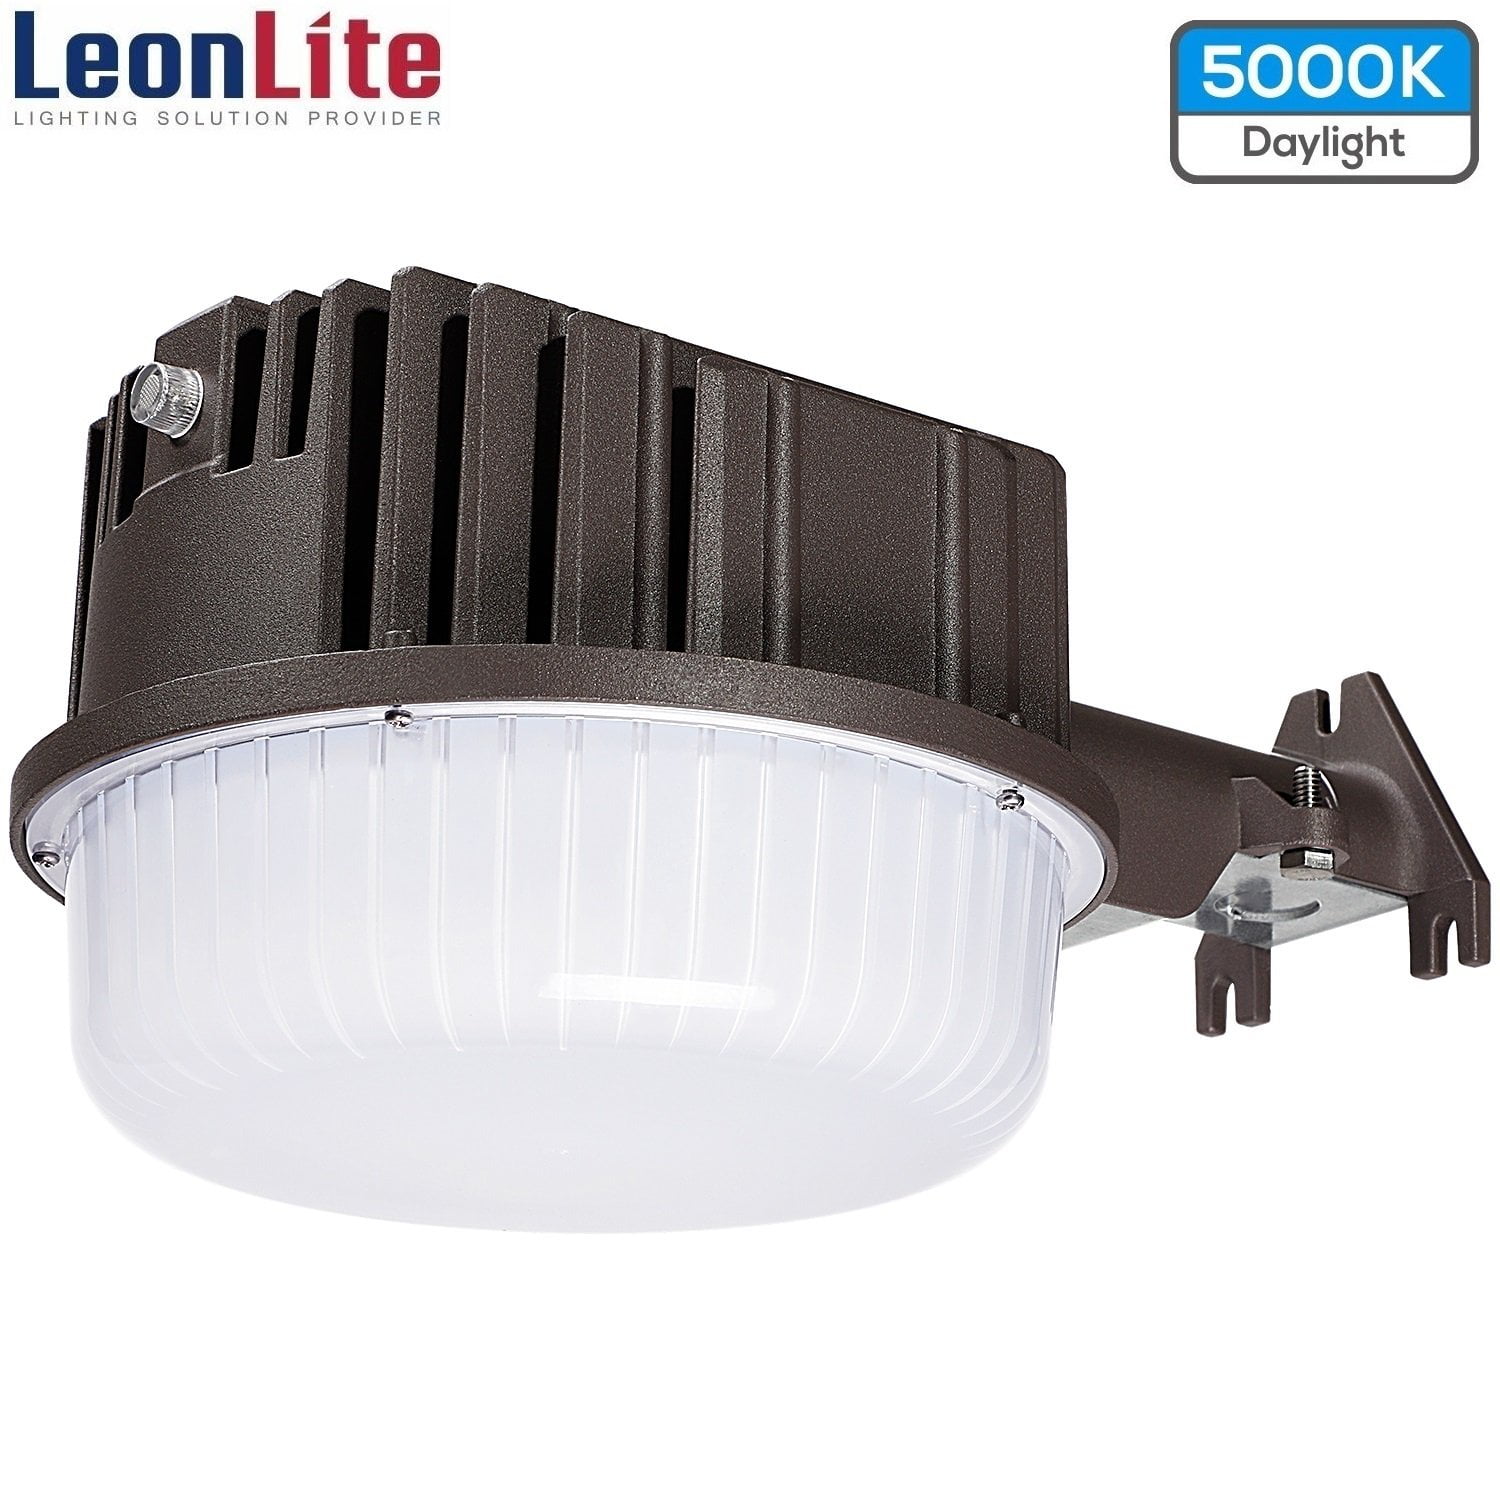 LED Barn light 80W dusk to dawn outdoor Ultra bright wall mount fixture 5000K 